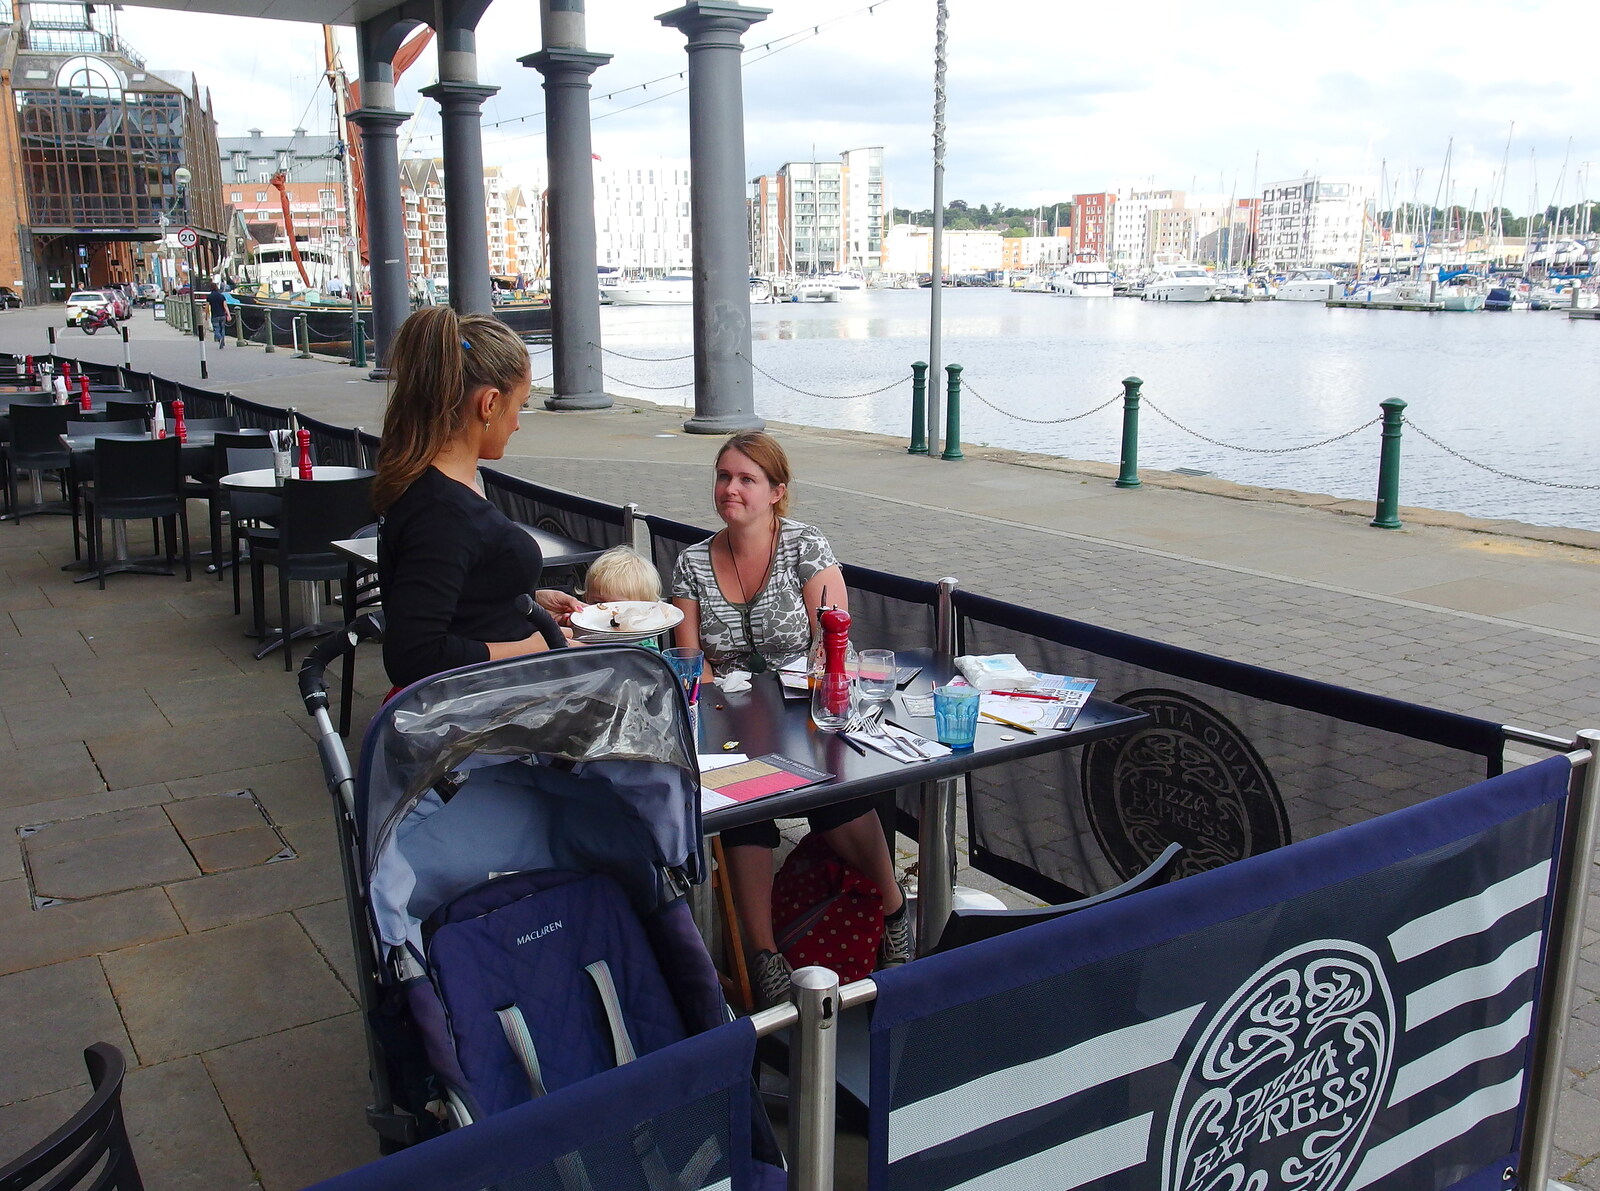 The Pizza Express waitress comes out from A Trip to Pizza Express, Nepture Quay, Ipswich, Suffolk - 9th August 2013